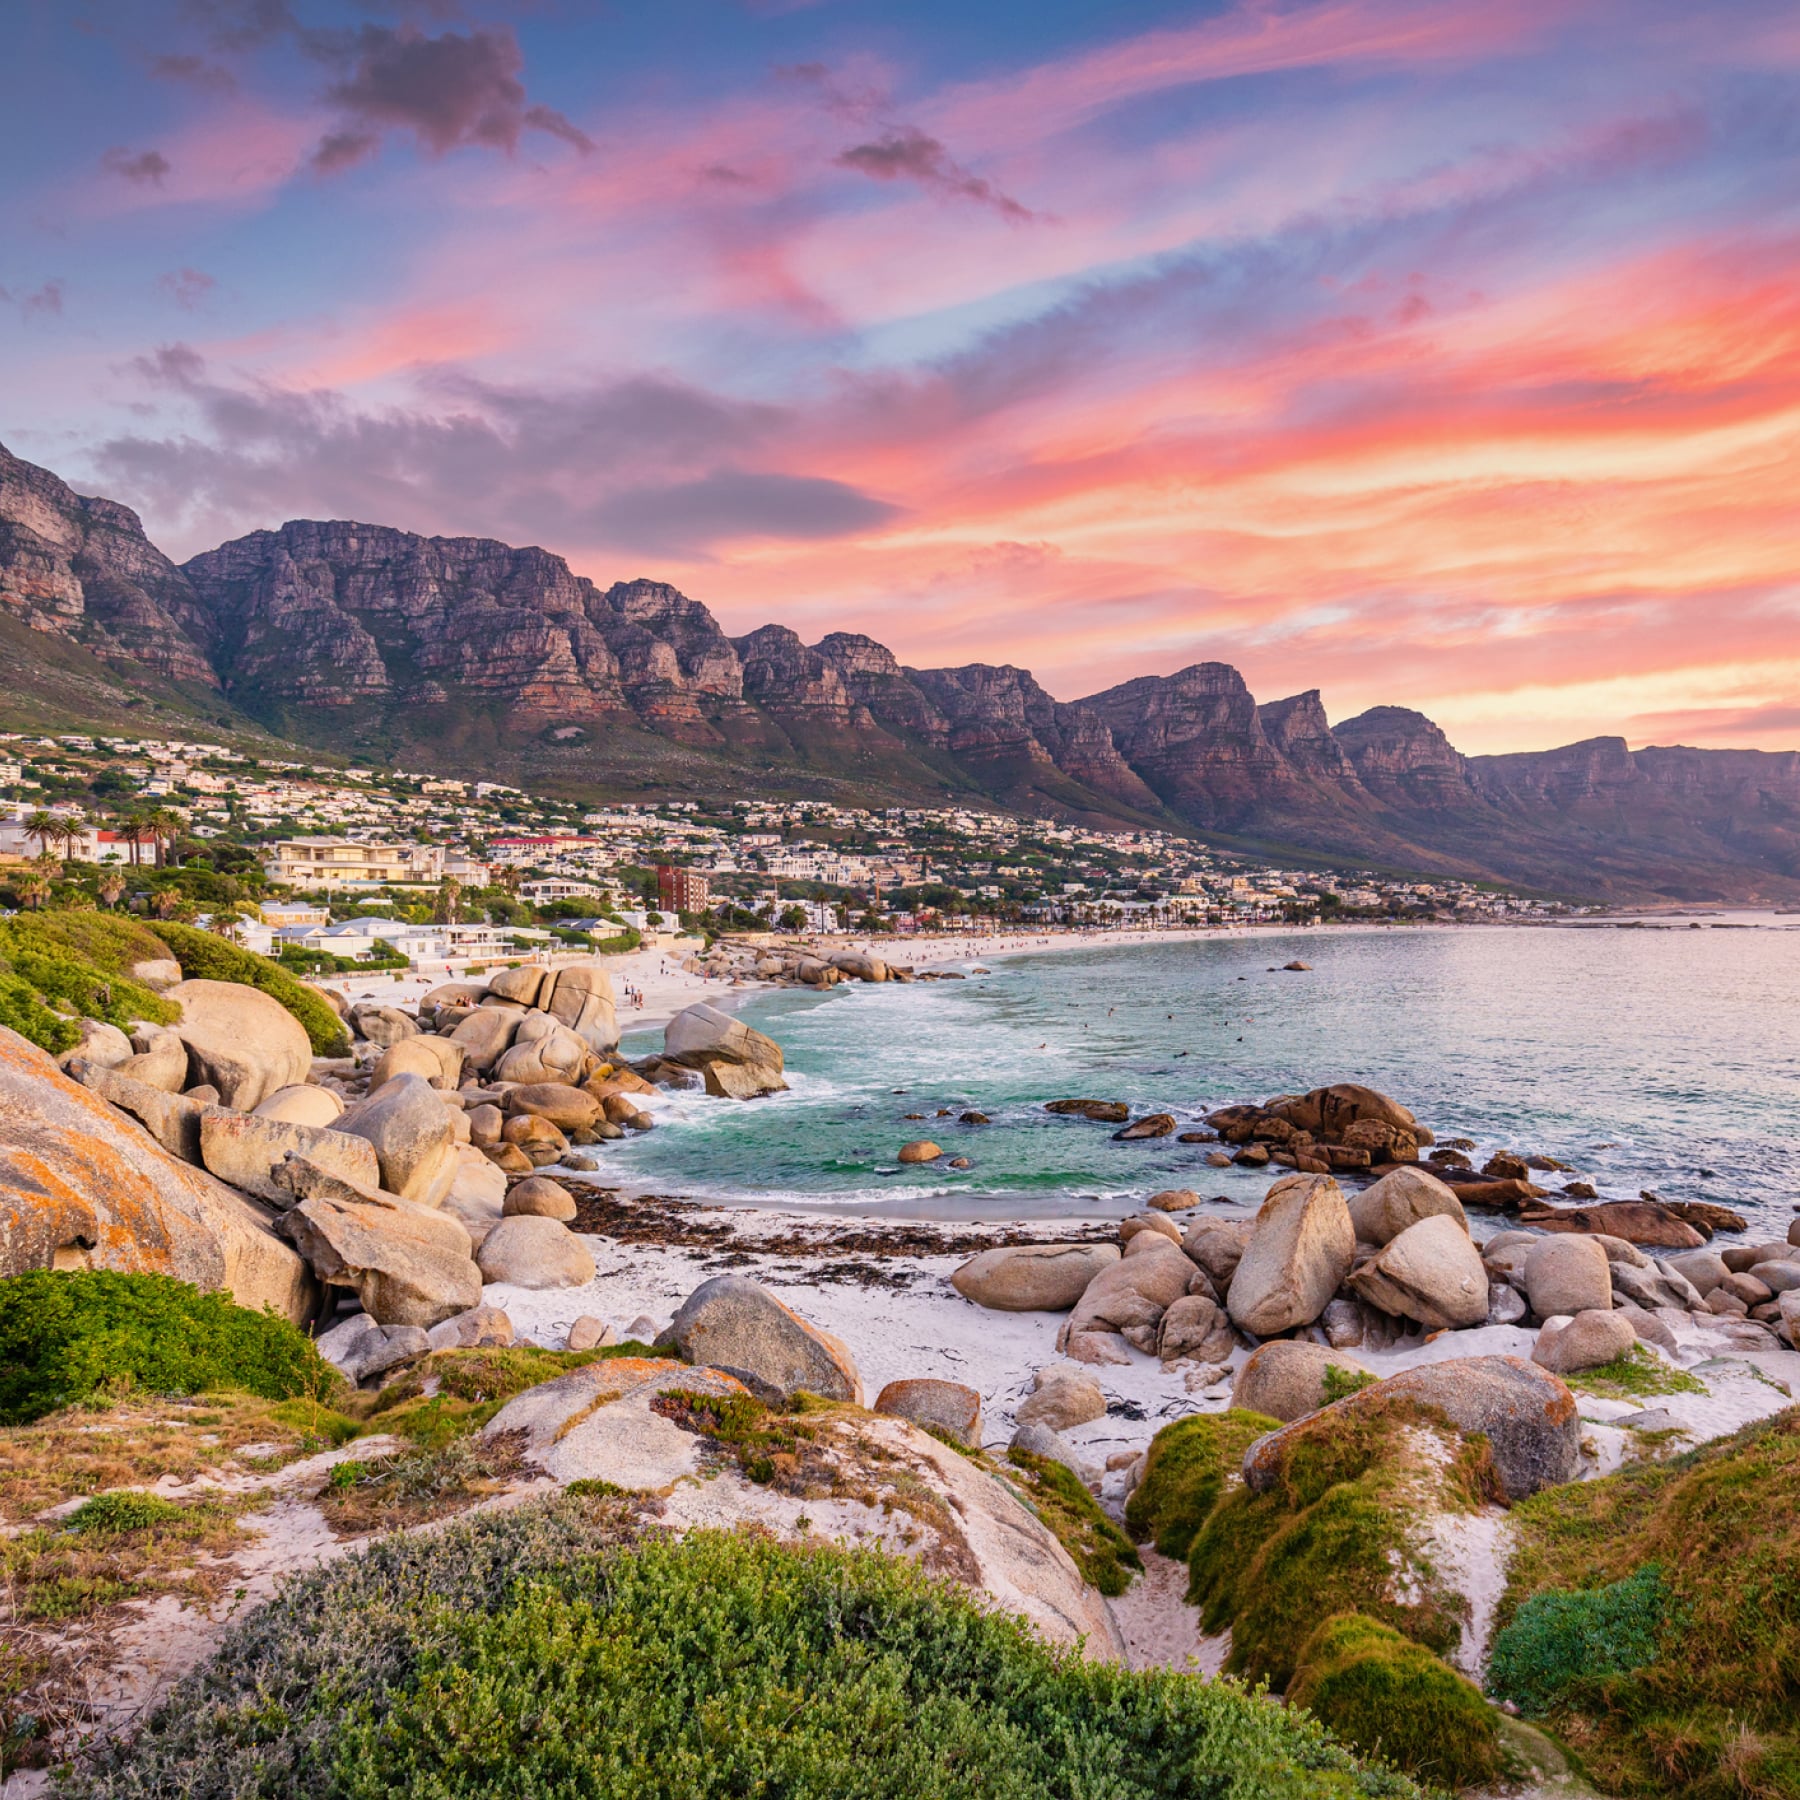 Cape Town is an ideal place for a wine tasting holiday